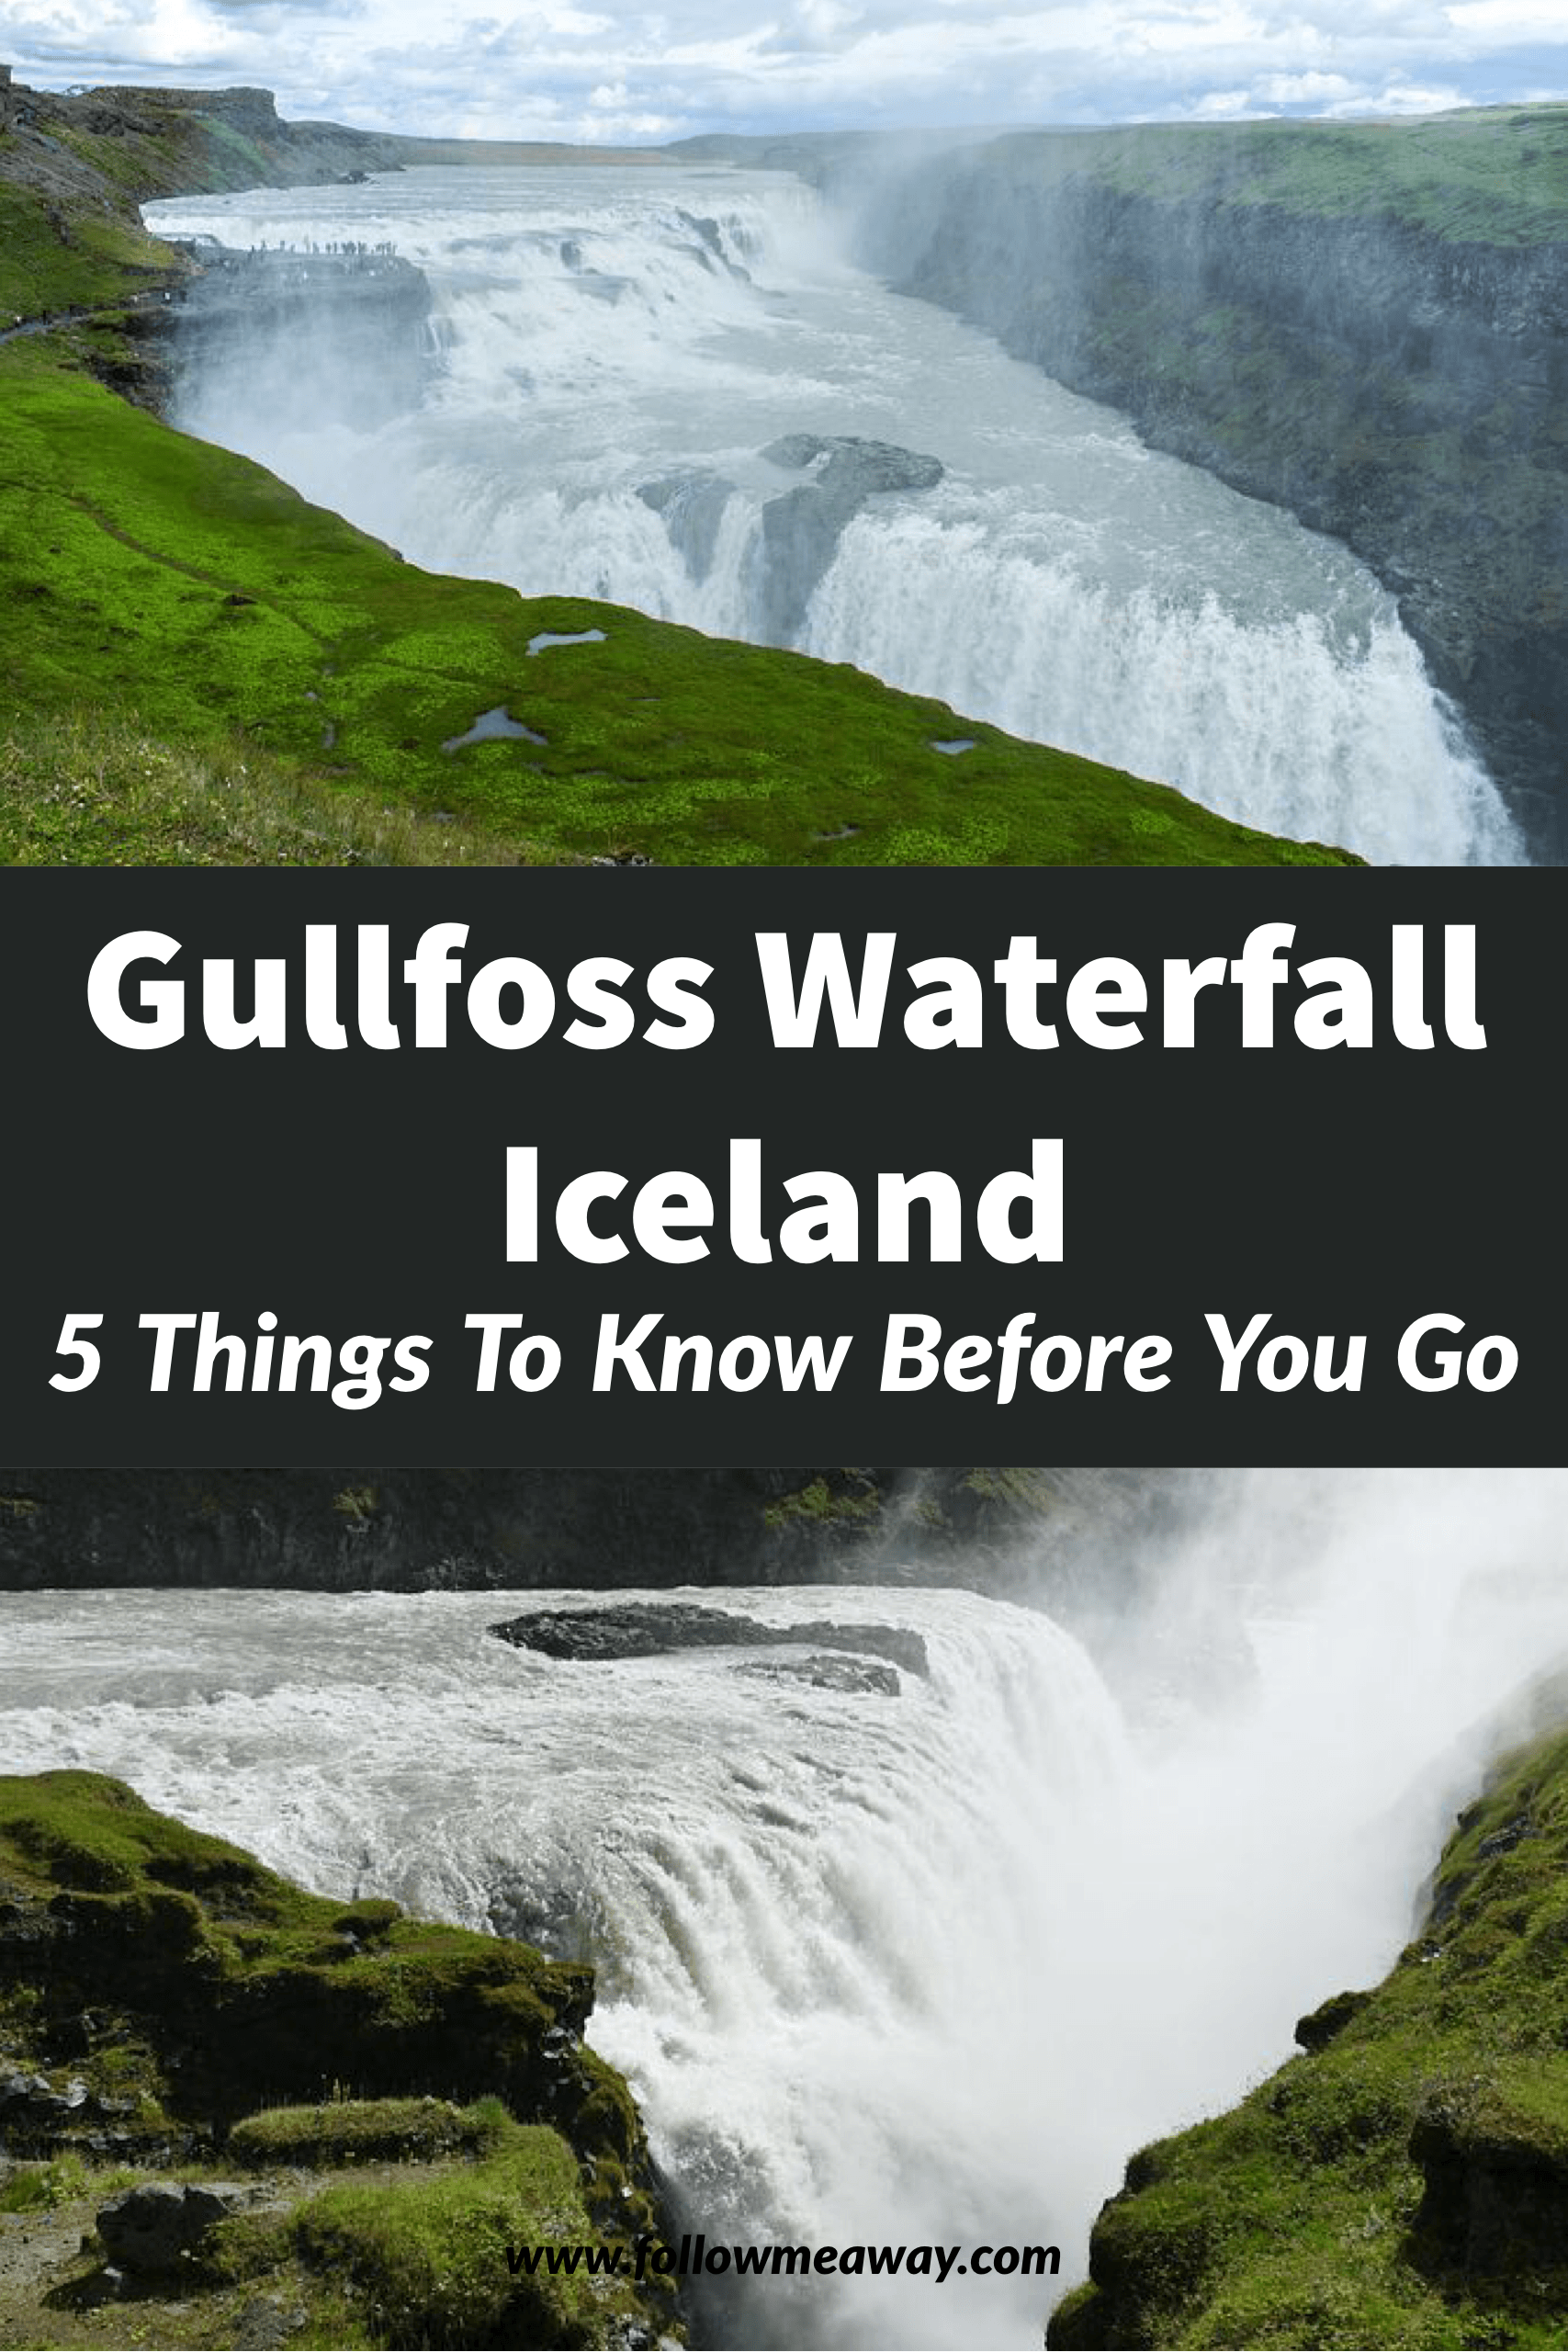 5 Things To Know Before Visiting Gullfoss Waterfall Iceland | Gullfoss Waterfall Iceland Tips | Waterfalls In Iceland | Best iceland waterfalls | how to see gullfoss iceland | iceland travel tips | iceland travel guide | top waterfalls in Iceland | visiting Gullfoss Iceland